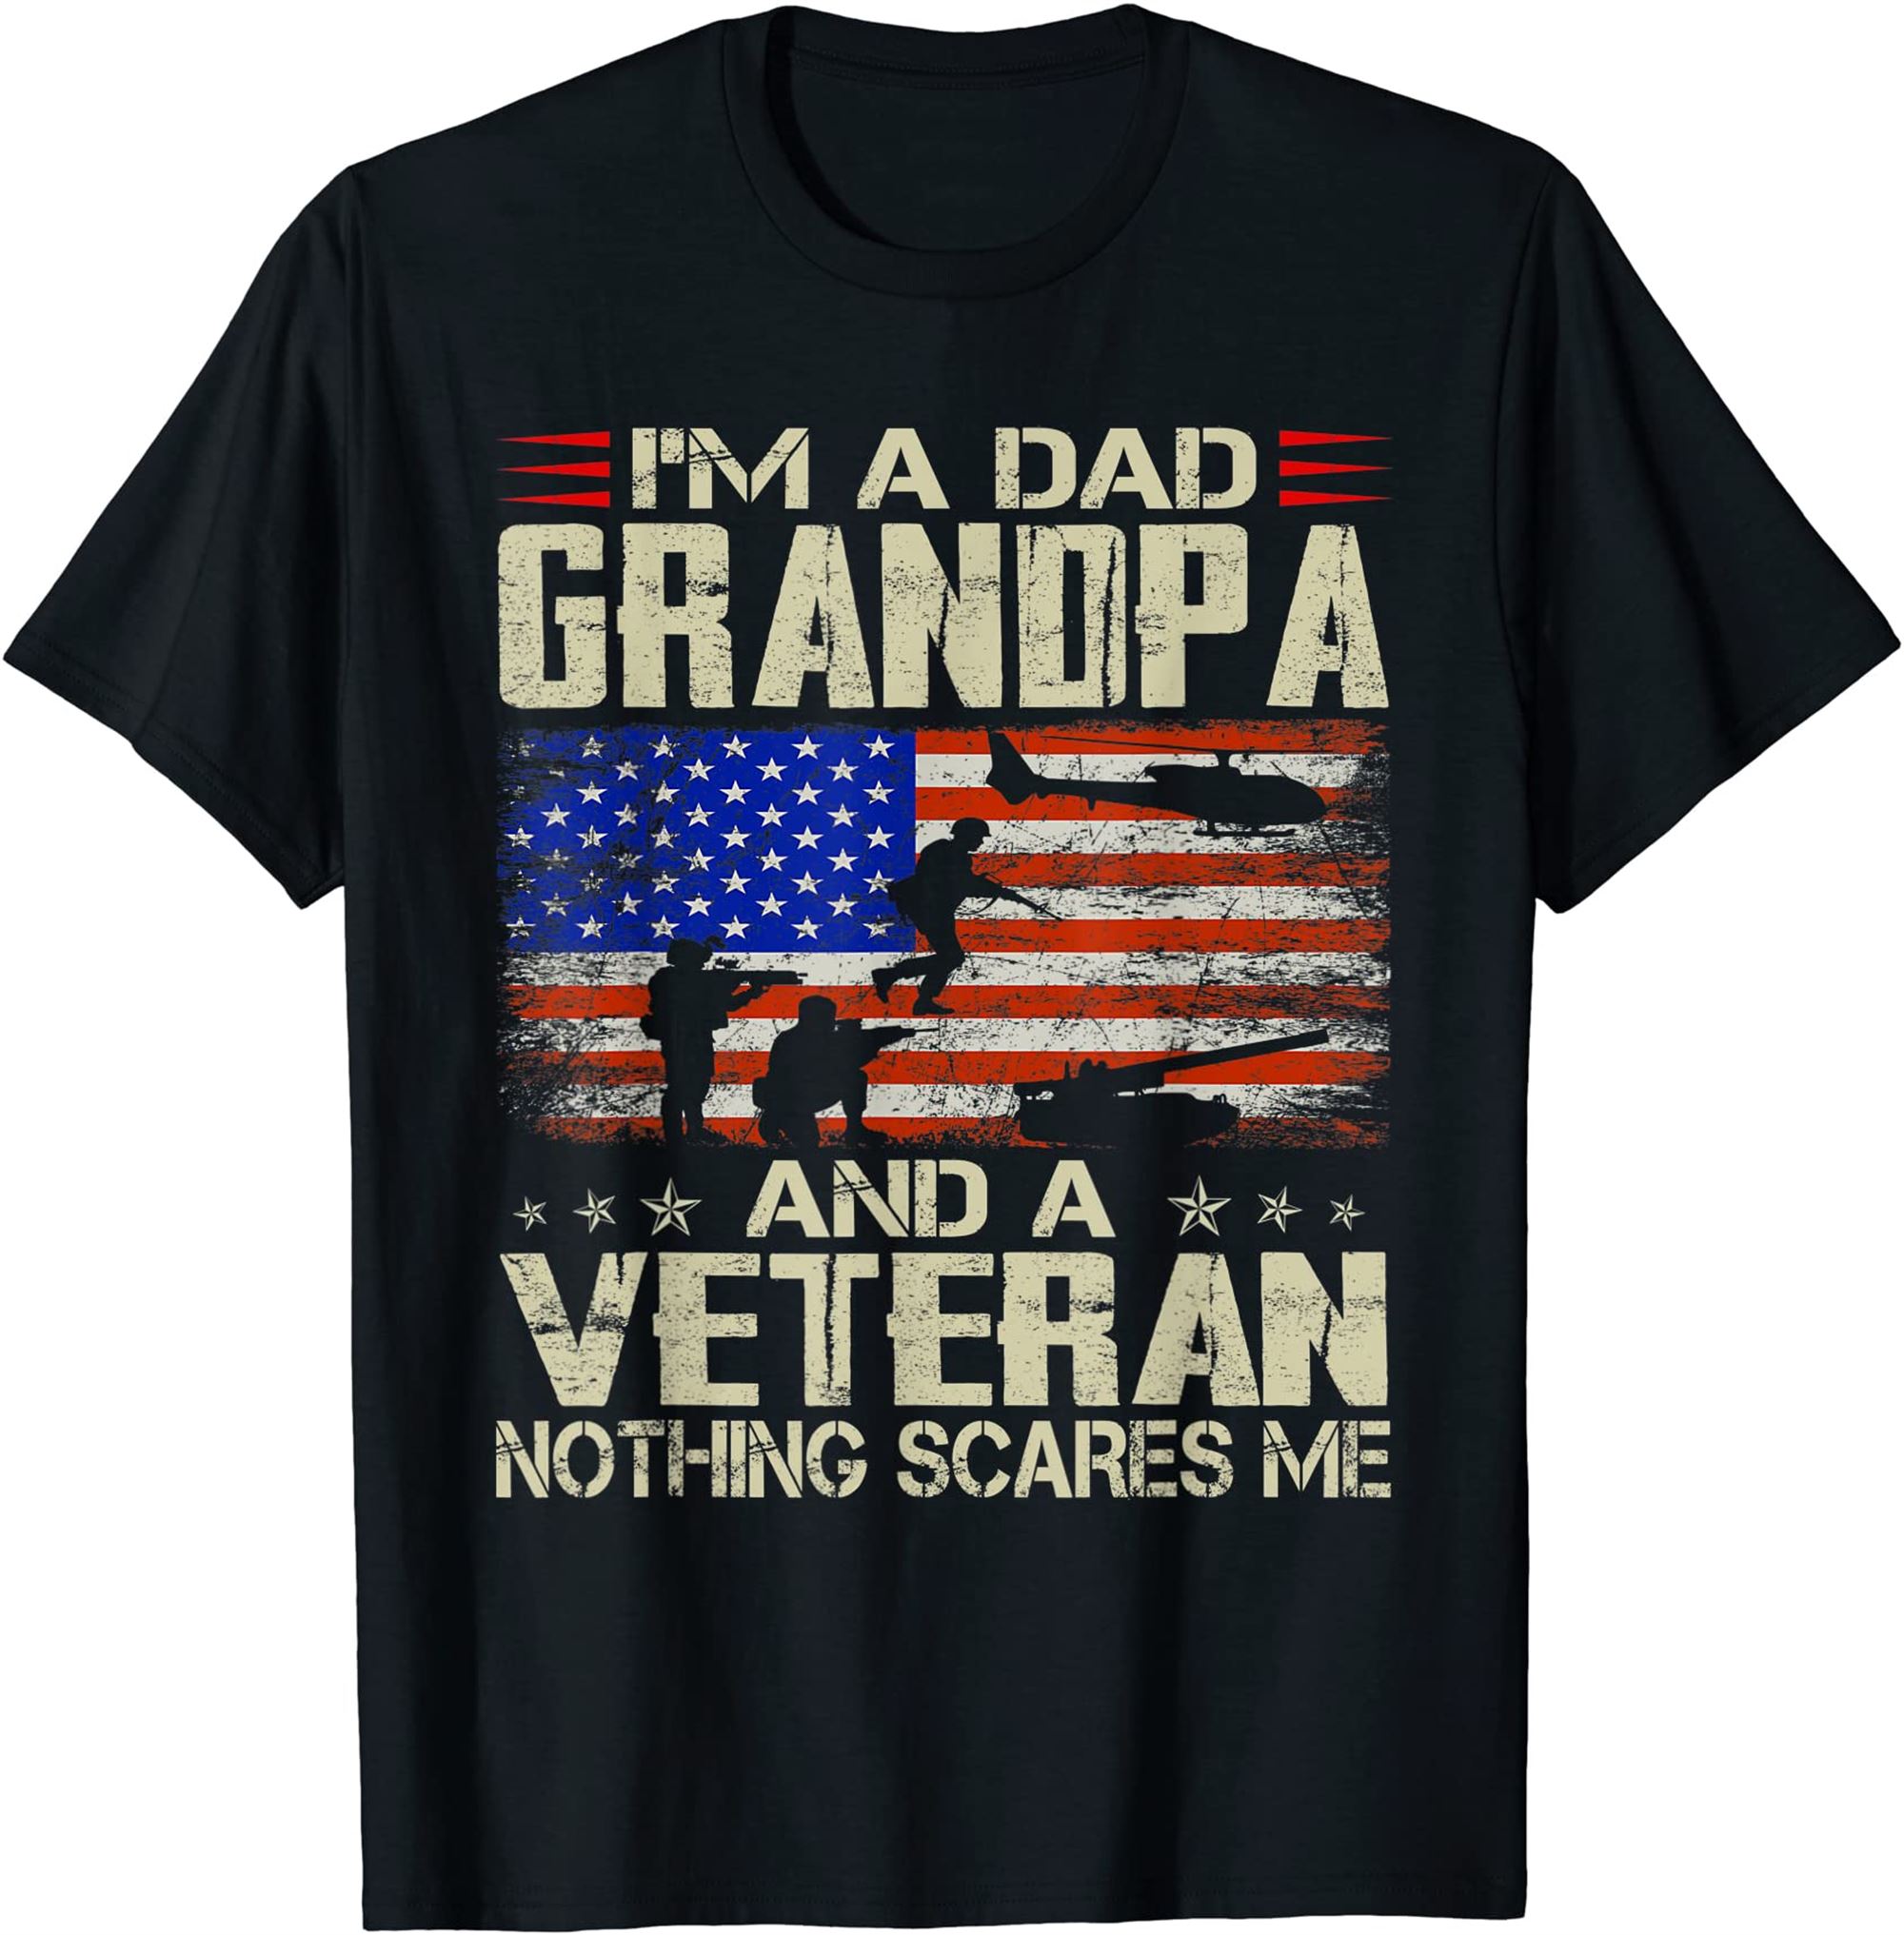 Im A Dad Grandpa And Veteran Fathers Day Funny Retro T-shirt Full Size Up To 5xl